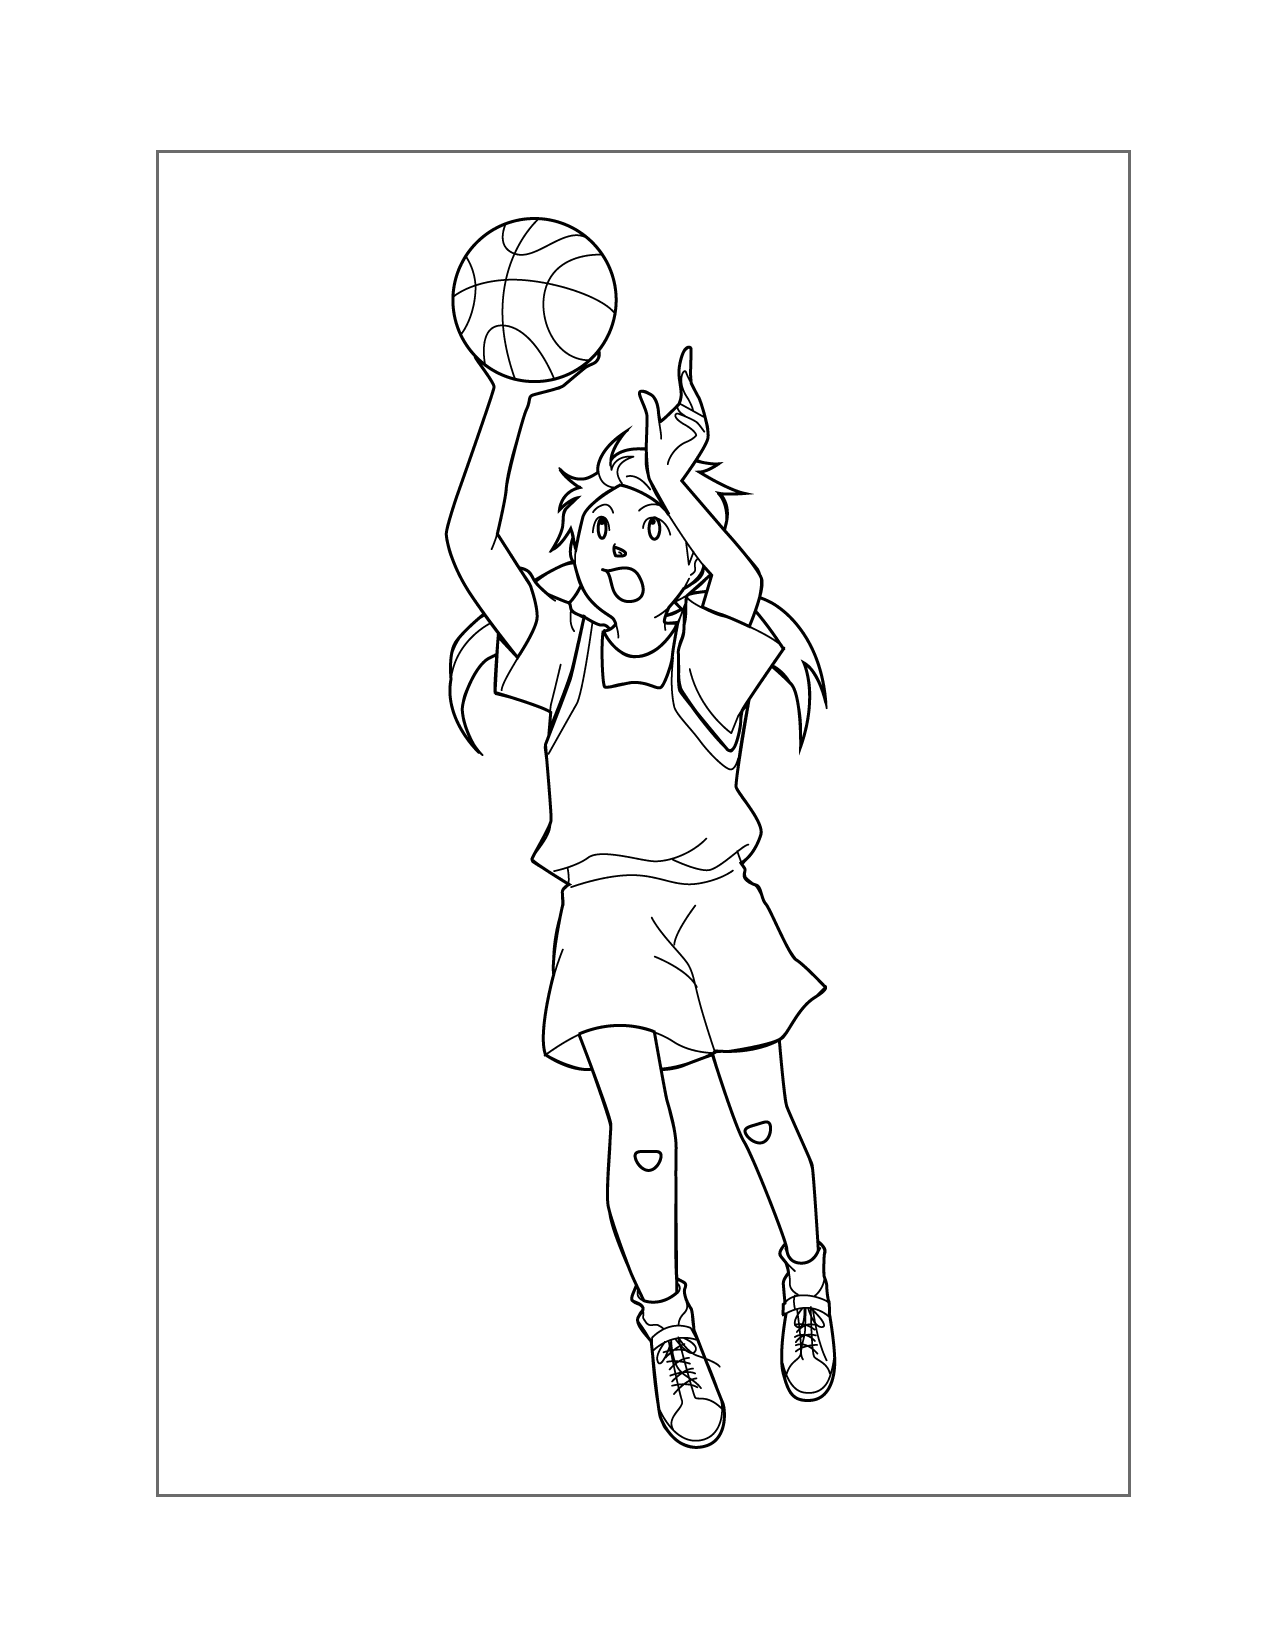 Girls Basketball Coloring Page